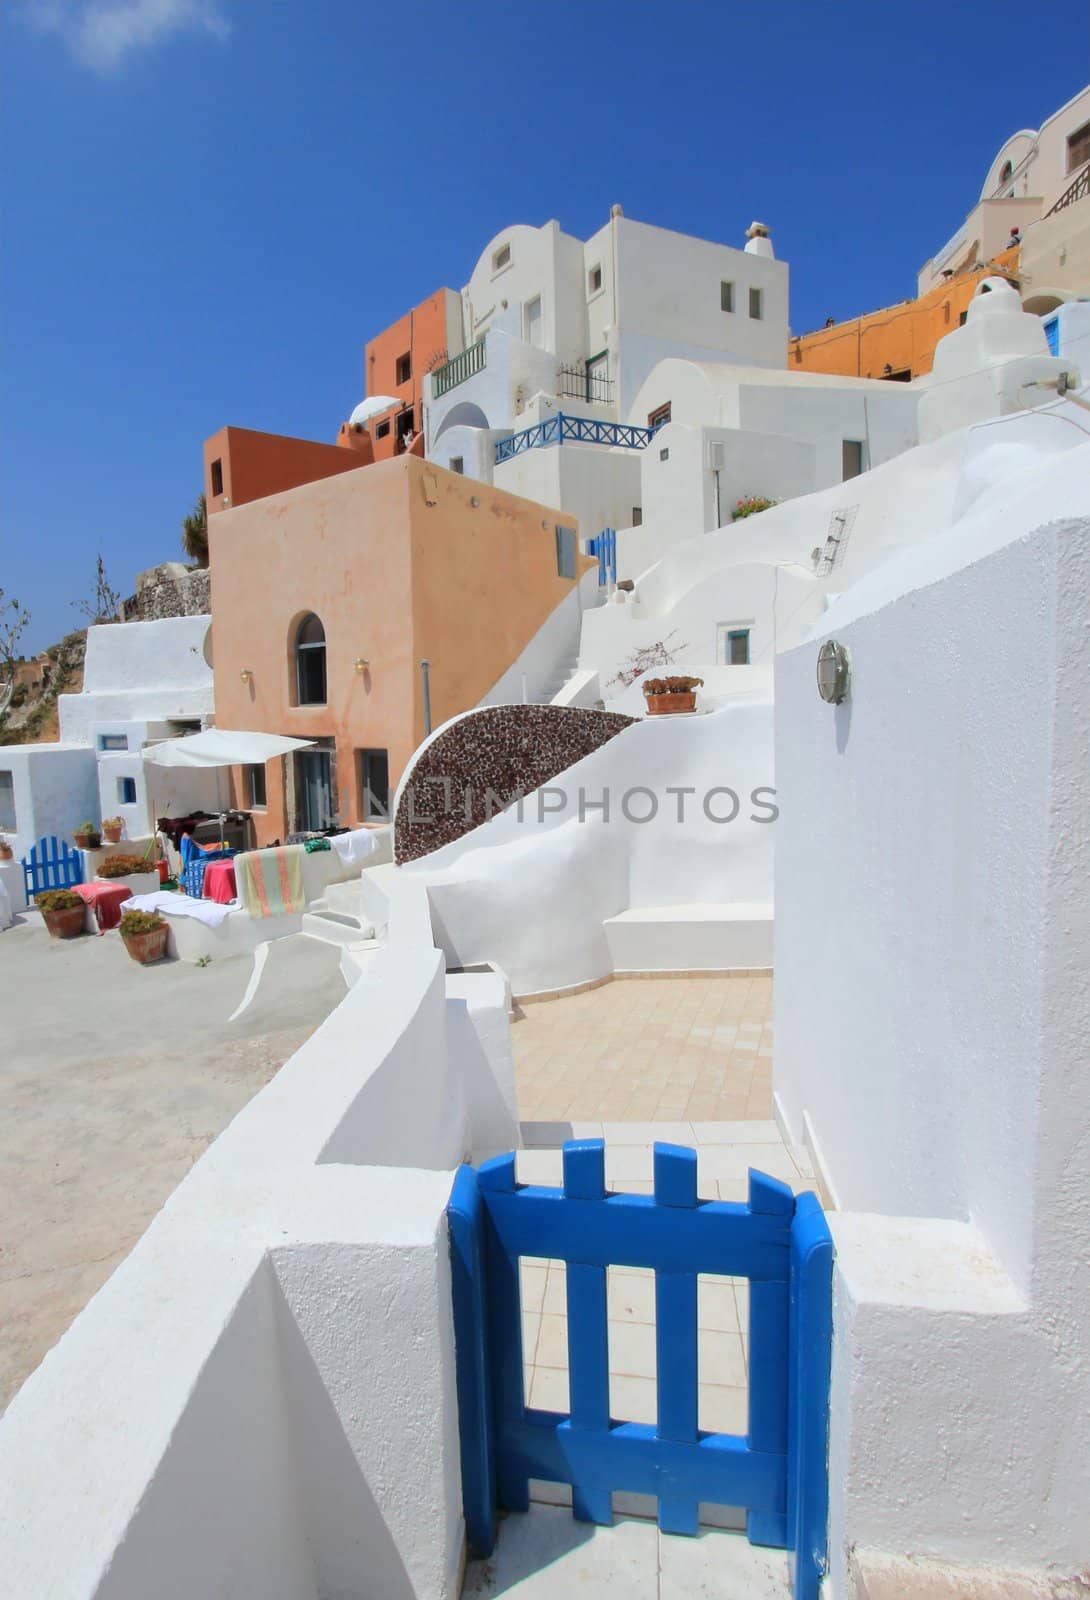 Colorful street architecture by beautiful weather, Oia, Santorini, Greece